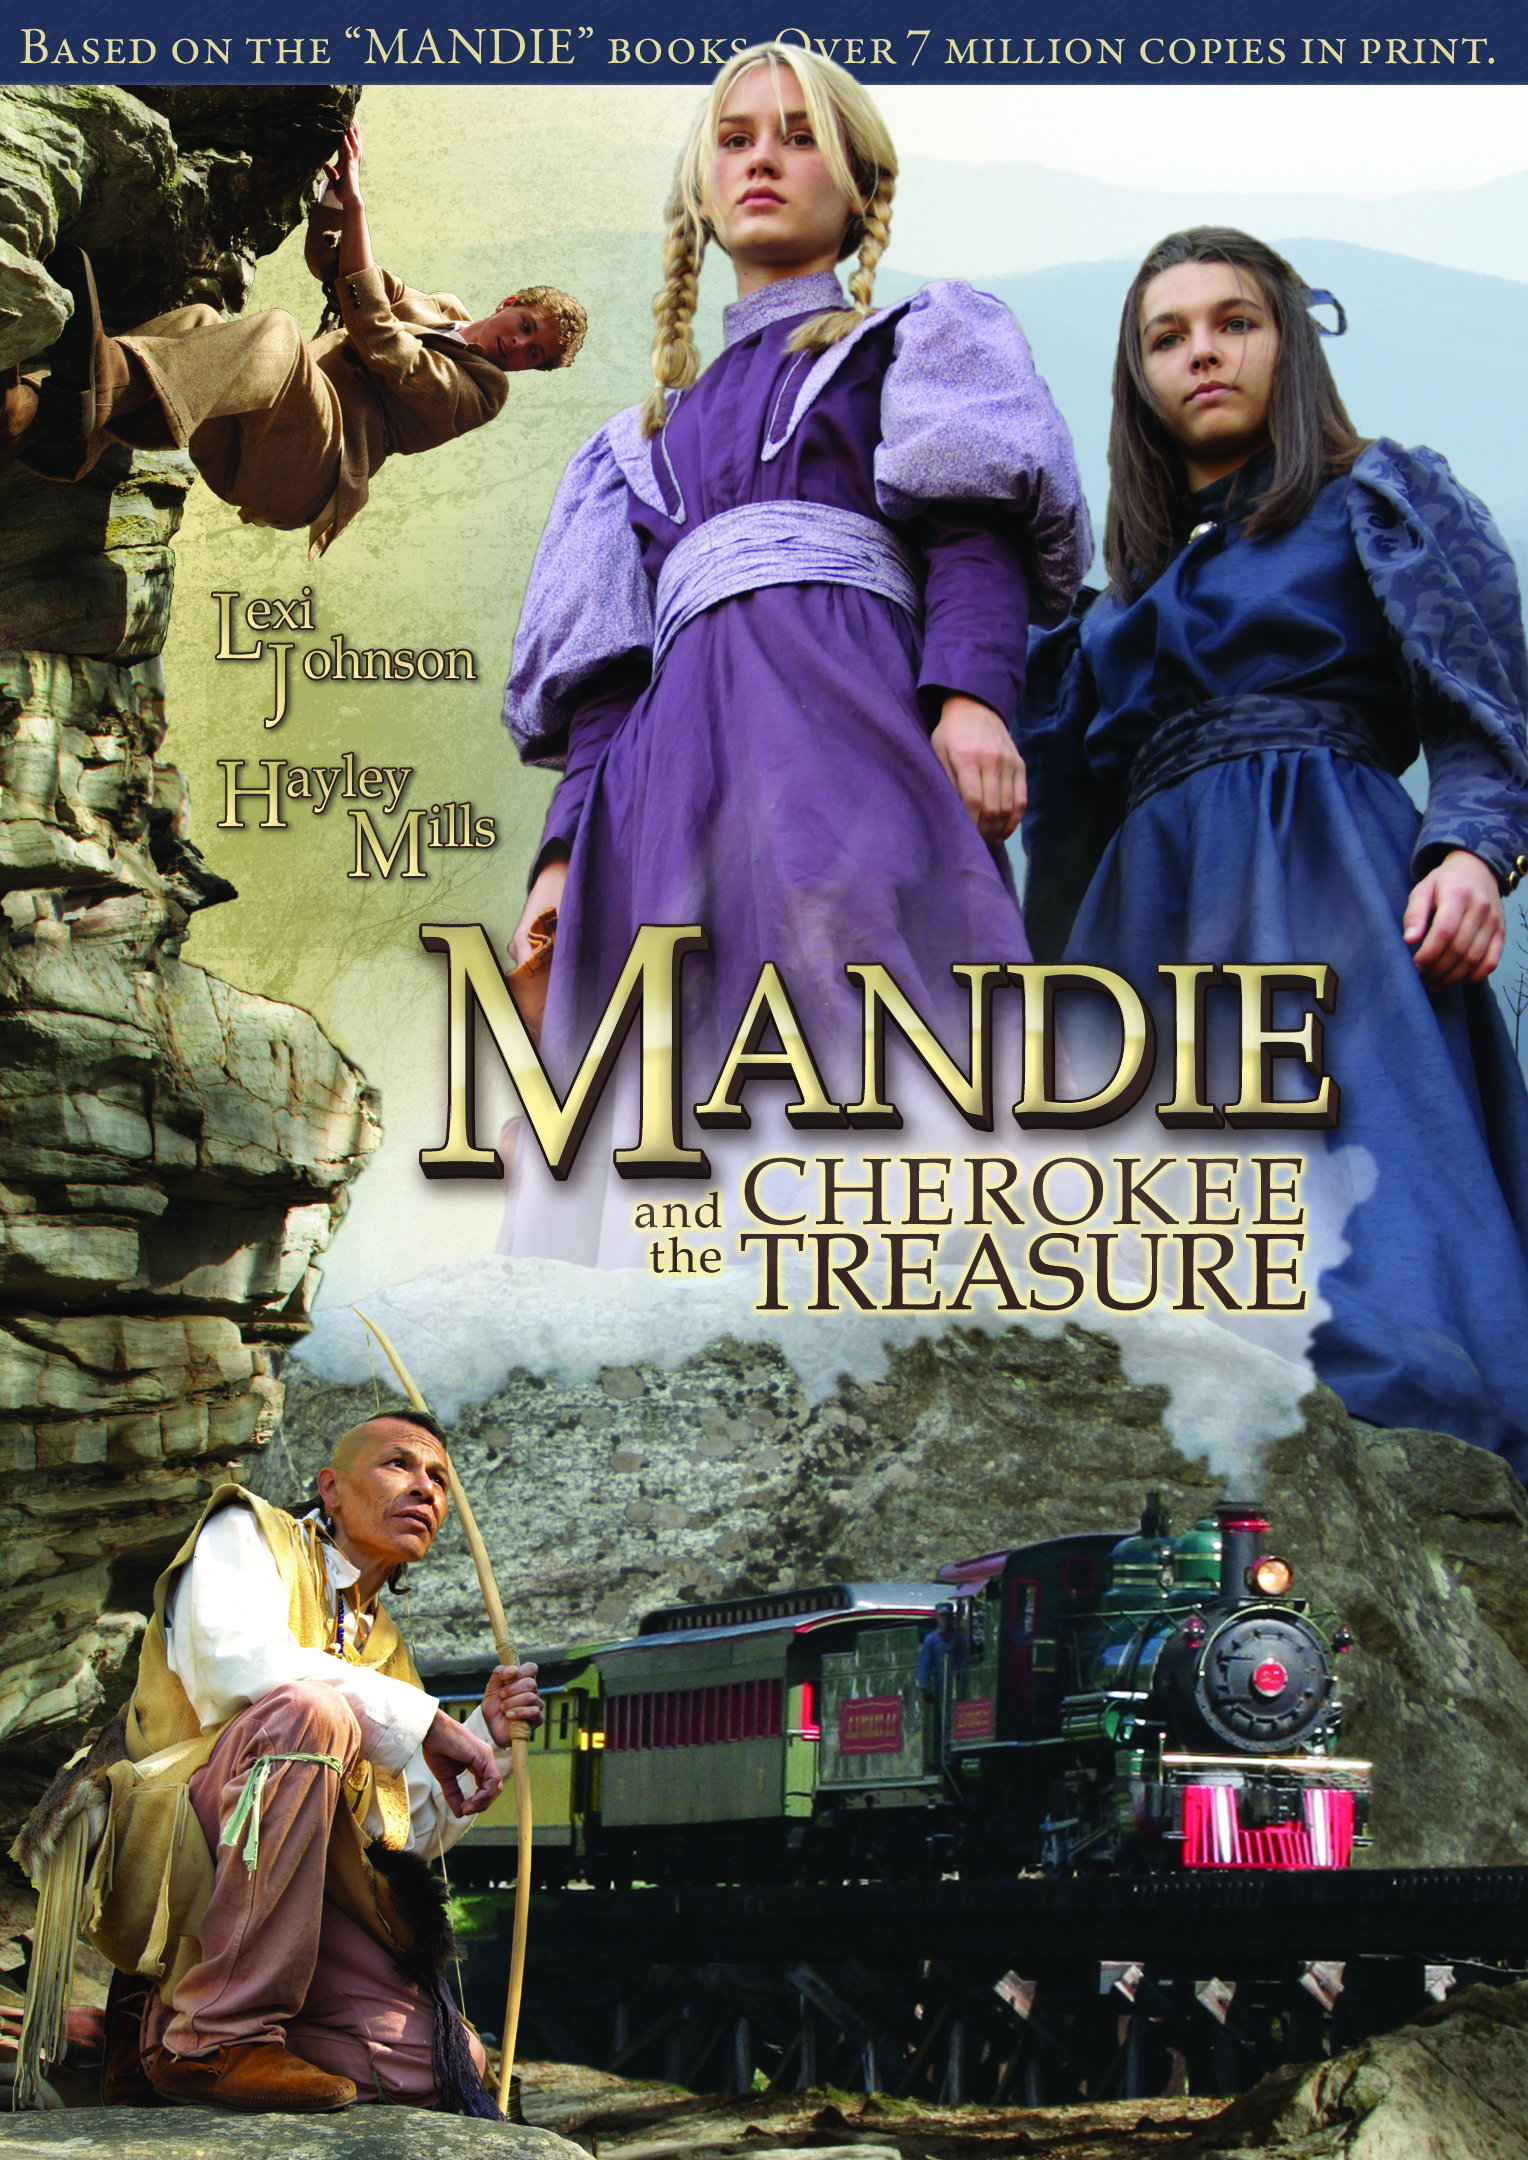 Mandie And The Secret Tunnel 2009 18446 Poster.jpg